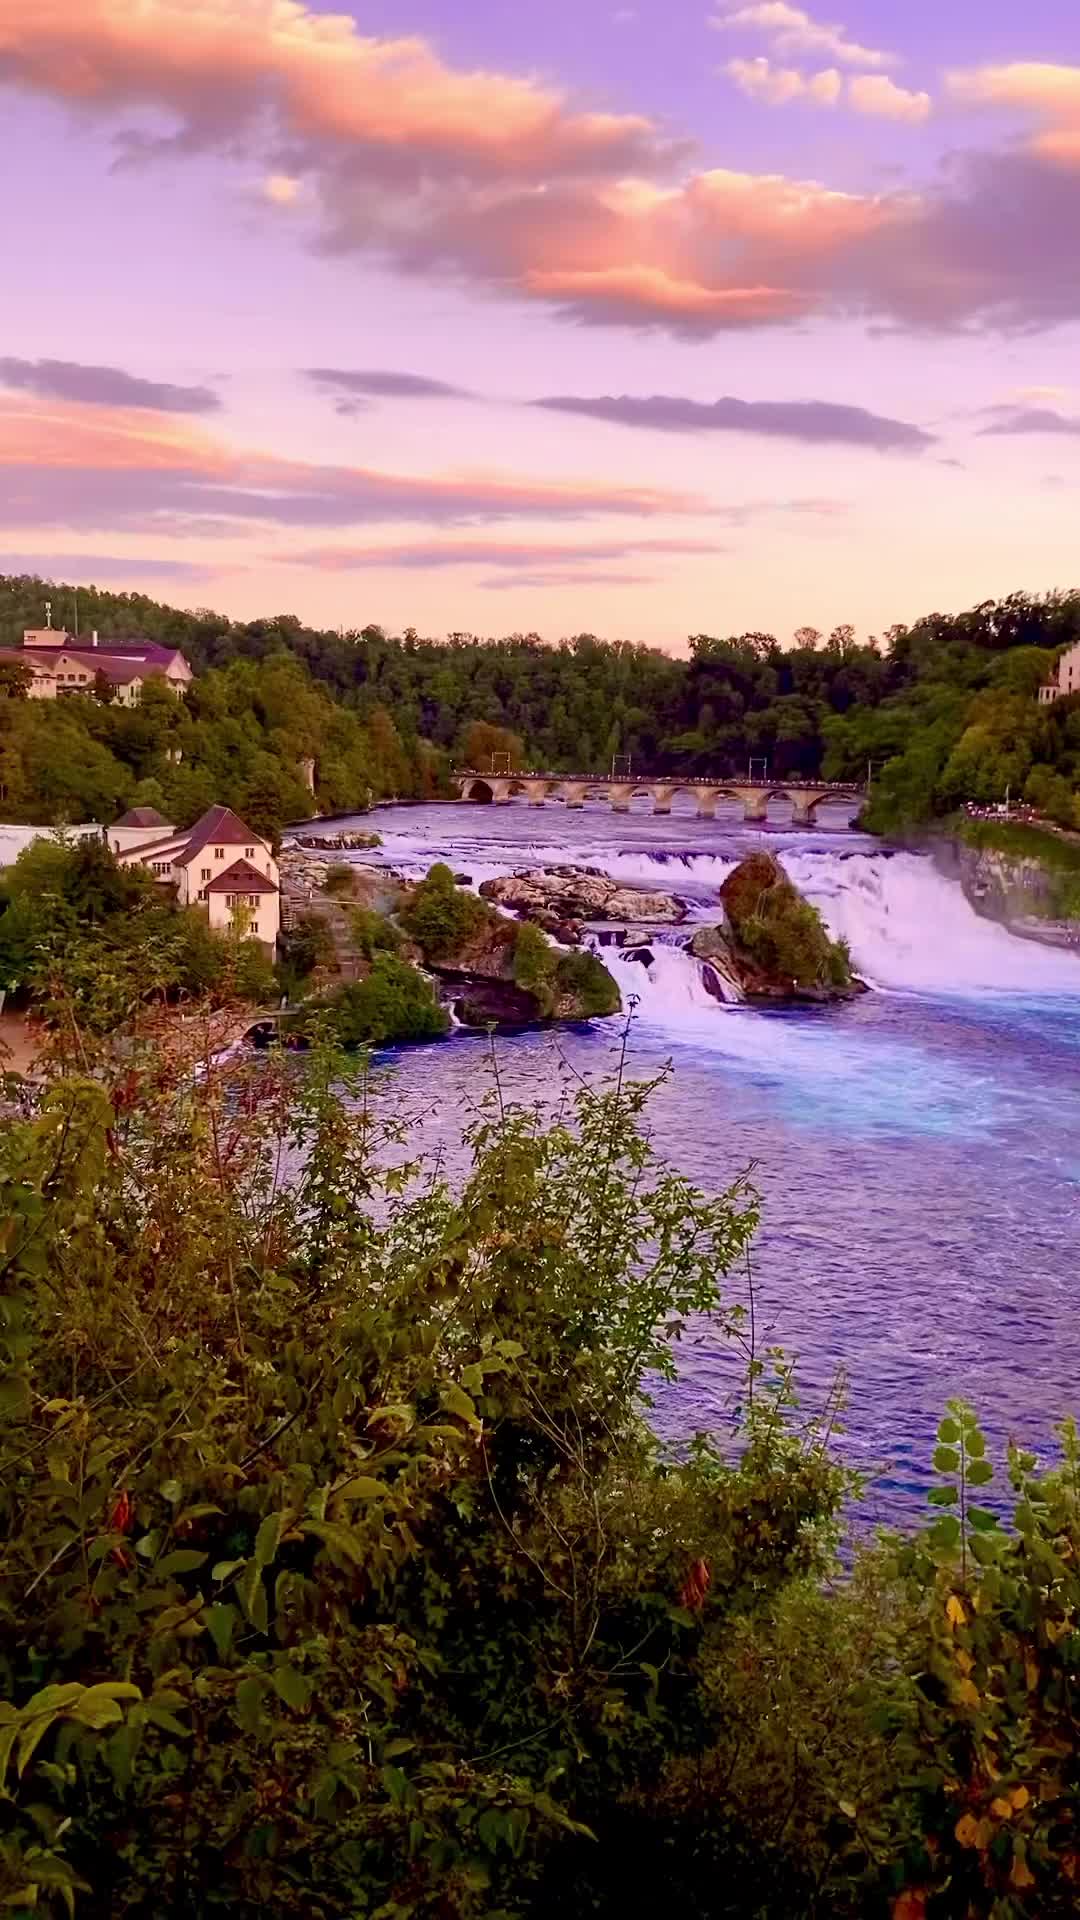 🇬🇧🇮🇩👇🇨🇭BEAUTIFUL SPOT TO SEE RHEINFALL🇨🇭FROM ABOVE, SAVE THIS 👇

📍NEUHAUSEN AM RHEINFALL TRAIN STATION🇨🇭

🌸Where you can capture: long Rhein River, Rhein waterfall together with the train bridge and Schloss Laufen (Laufen Castle)

🌸Rheinfall is Europe’s largest waterfall and one of Most visited destinations in Switzerland🇨🇭

🌸only less than 1 hour journey by train from Zurich Main Station

➡️ @syifa_in_switzerland for more swiss locations & inspirations 

❤️SHARE this to your IG story

📌SAVE this reel for your next trip🇨🇭

🎥 @syifa_in_switzerland

#syifainswitzerland #rhein #rhine #sunset #rheinfall #rhine #rhinefall #zuerich #zürich #visitswitzerland #visitswiss #visitzurich #zurichinfluencer #zurichblogger #schaffhausen #neuhausenamrheinfall #schlosslaufen #swissinfluencer #swissblogger #switzerlandwonderland #switzerlandtourism #switzerlandtravel #switzerlandtrip #waterfall #zurich_switzerland  #bestofswitzerland  #swiss #switzerland_destinations  #schweiz